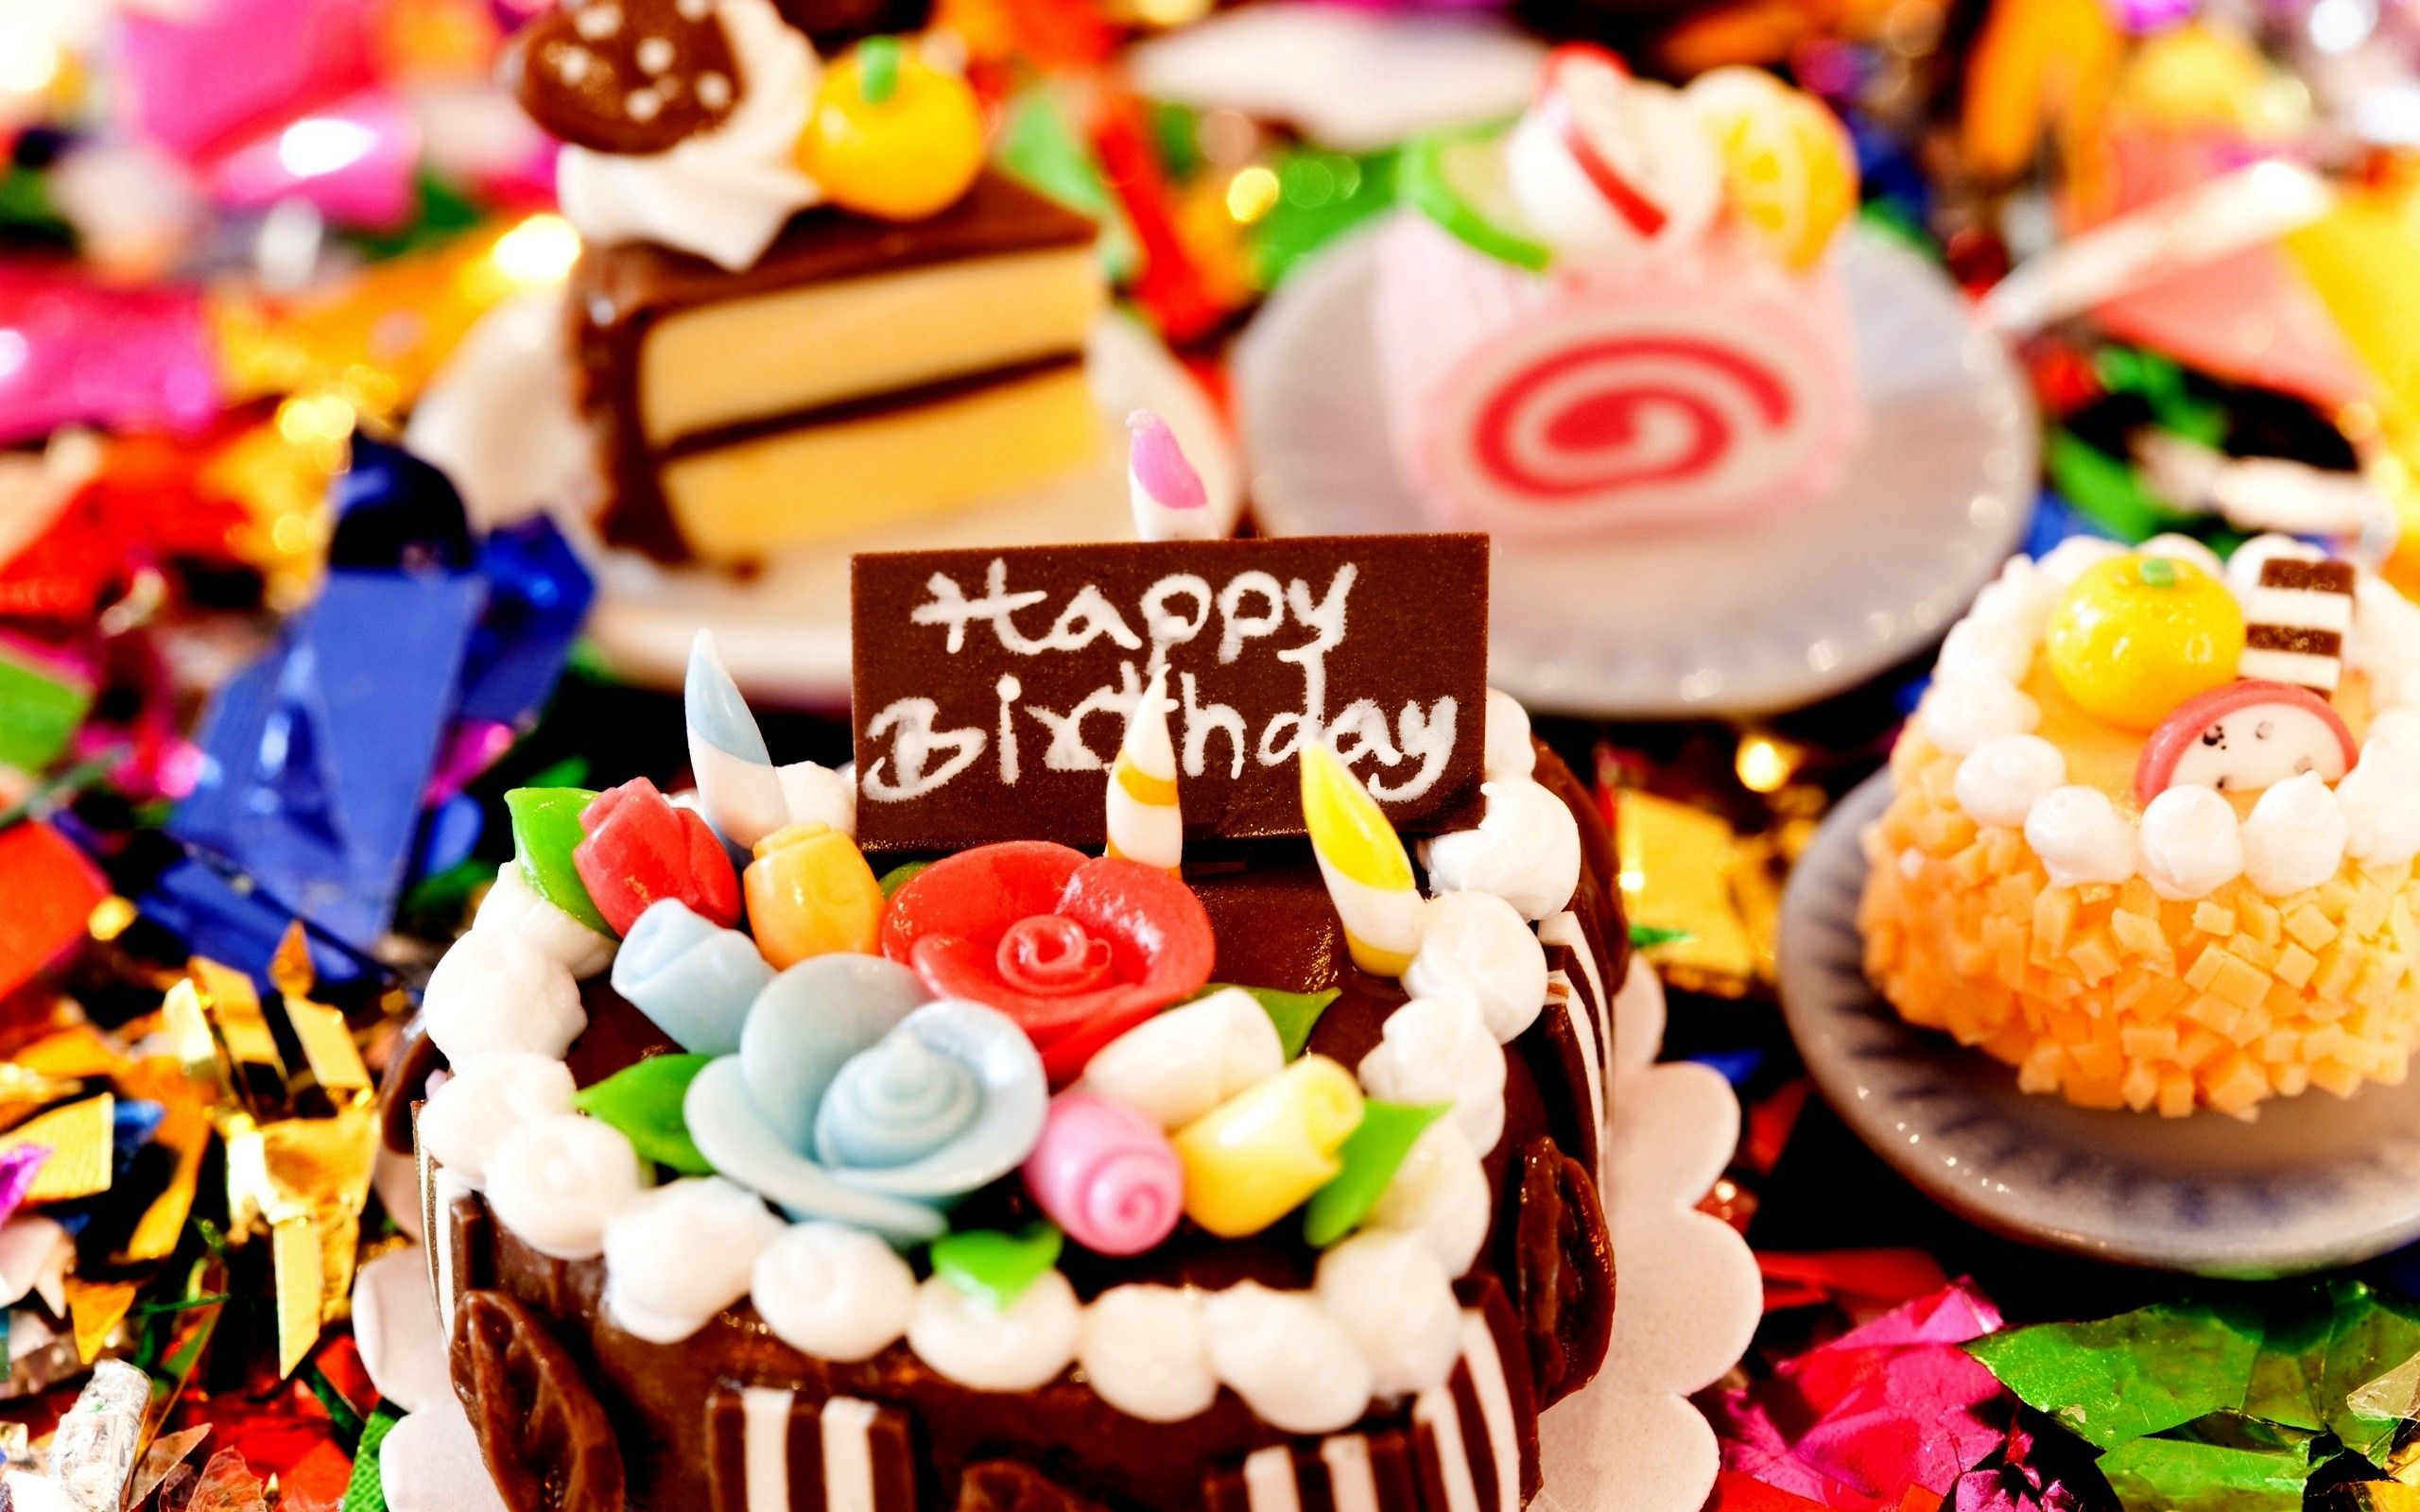 Birthday Wallpapers | Free Download HD Cake Celebration Party Images